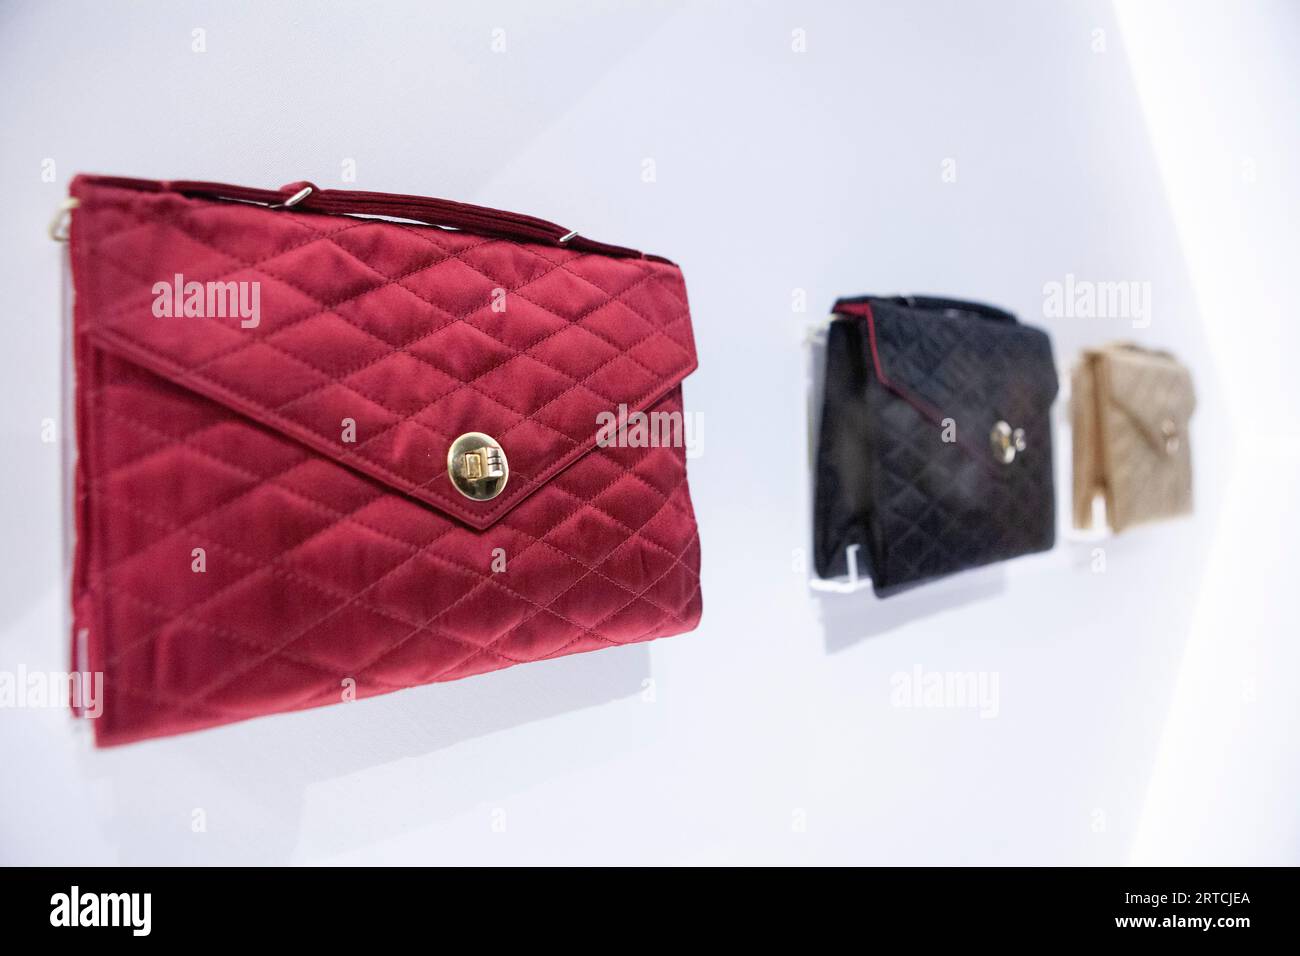 CHANEL, Bags, Sold 2a Red Chanel Classic Yen Wallet